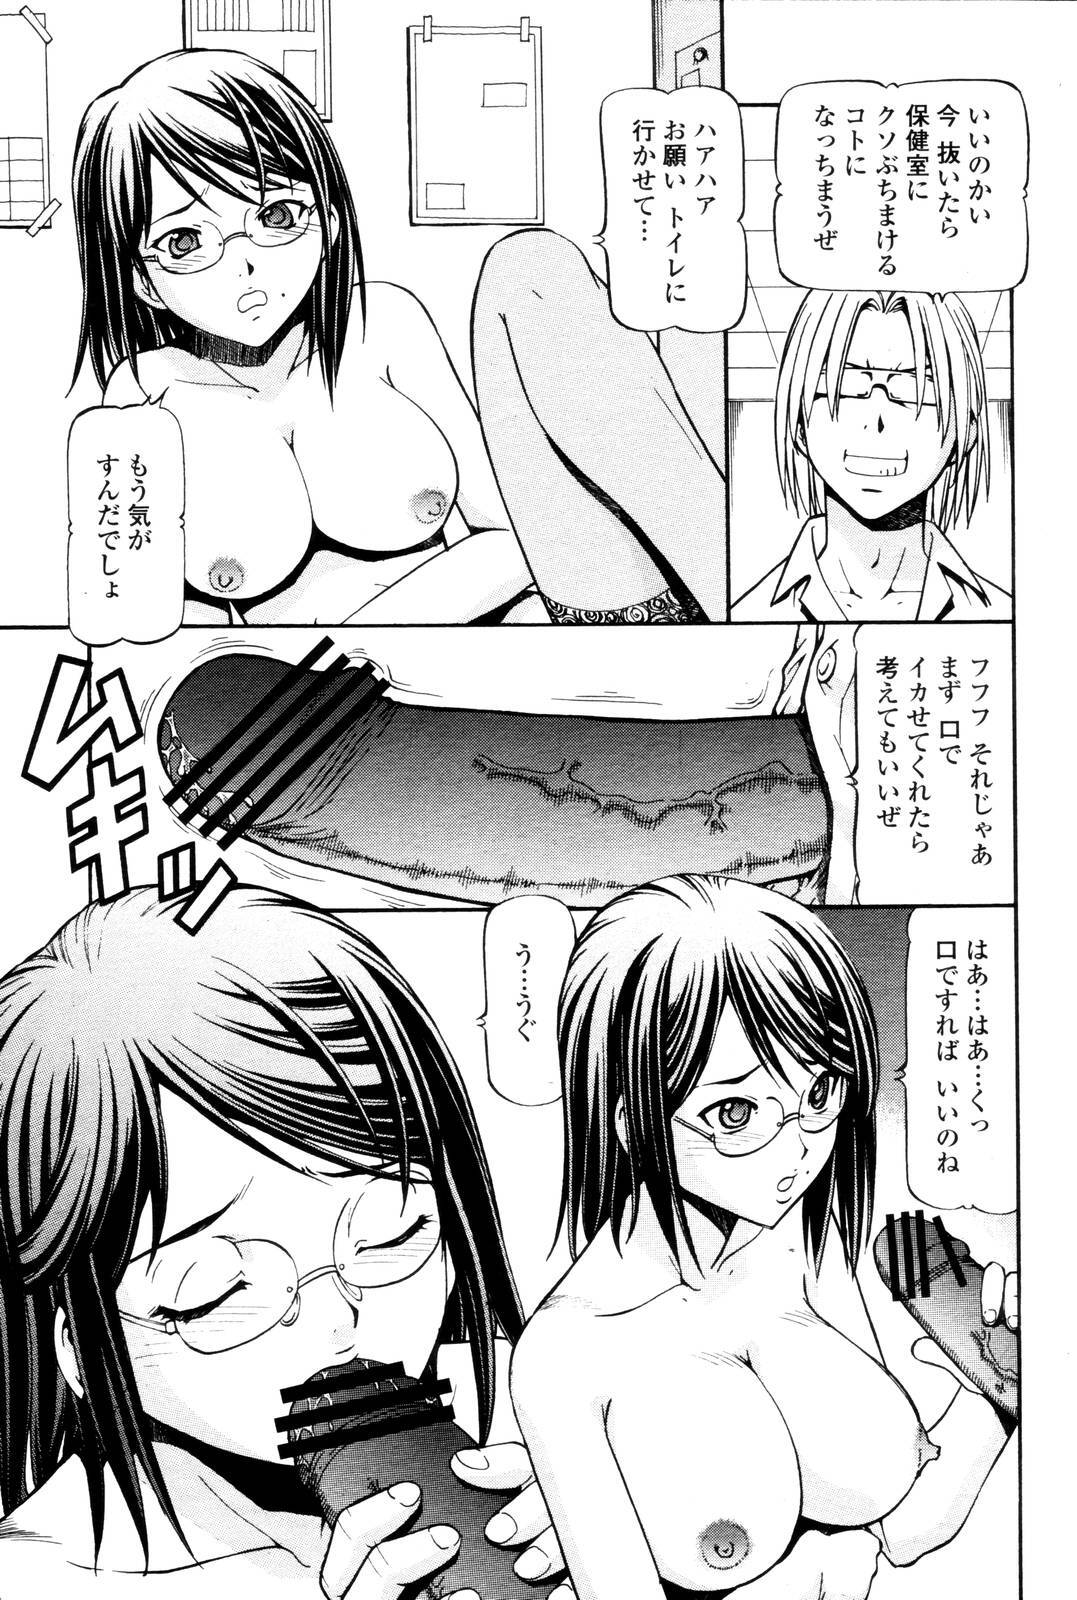 COMIC Momohime 2006-10 page 33 full